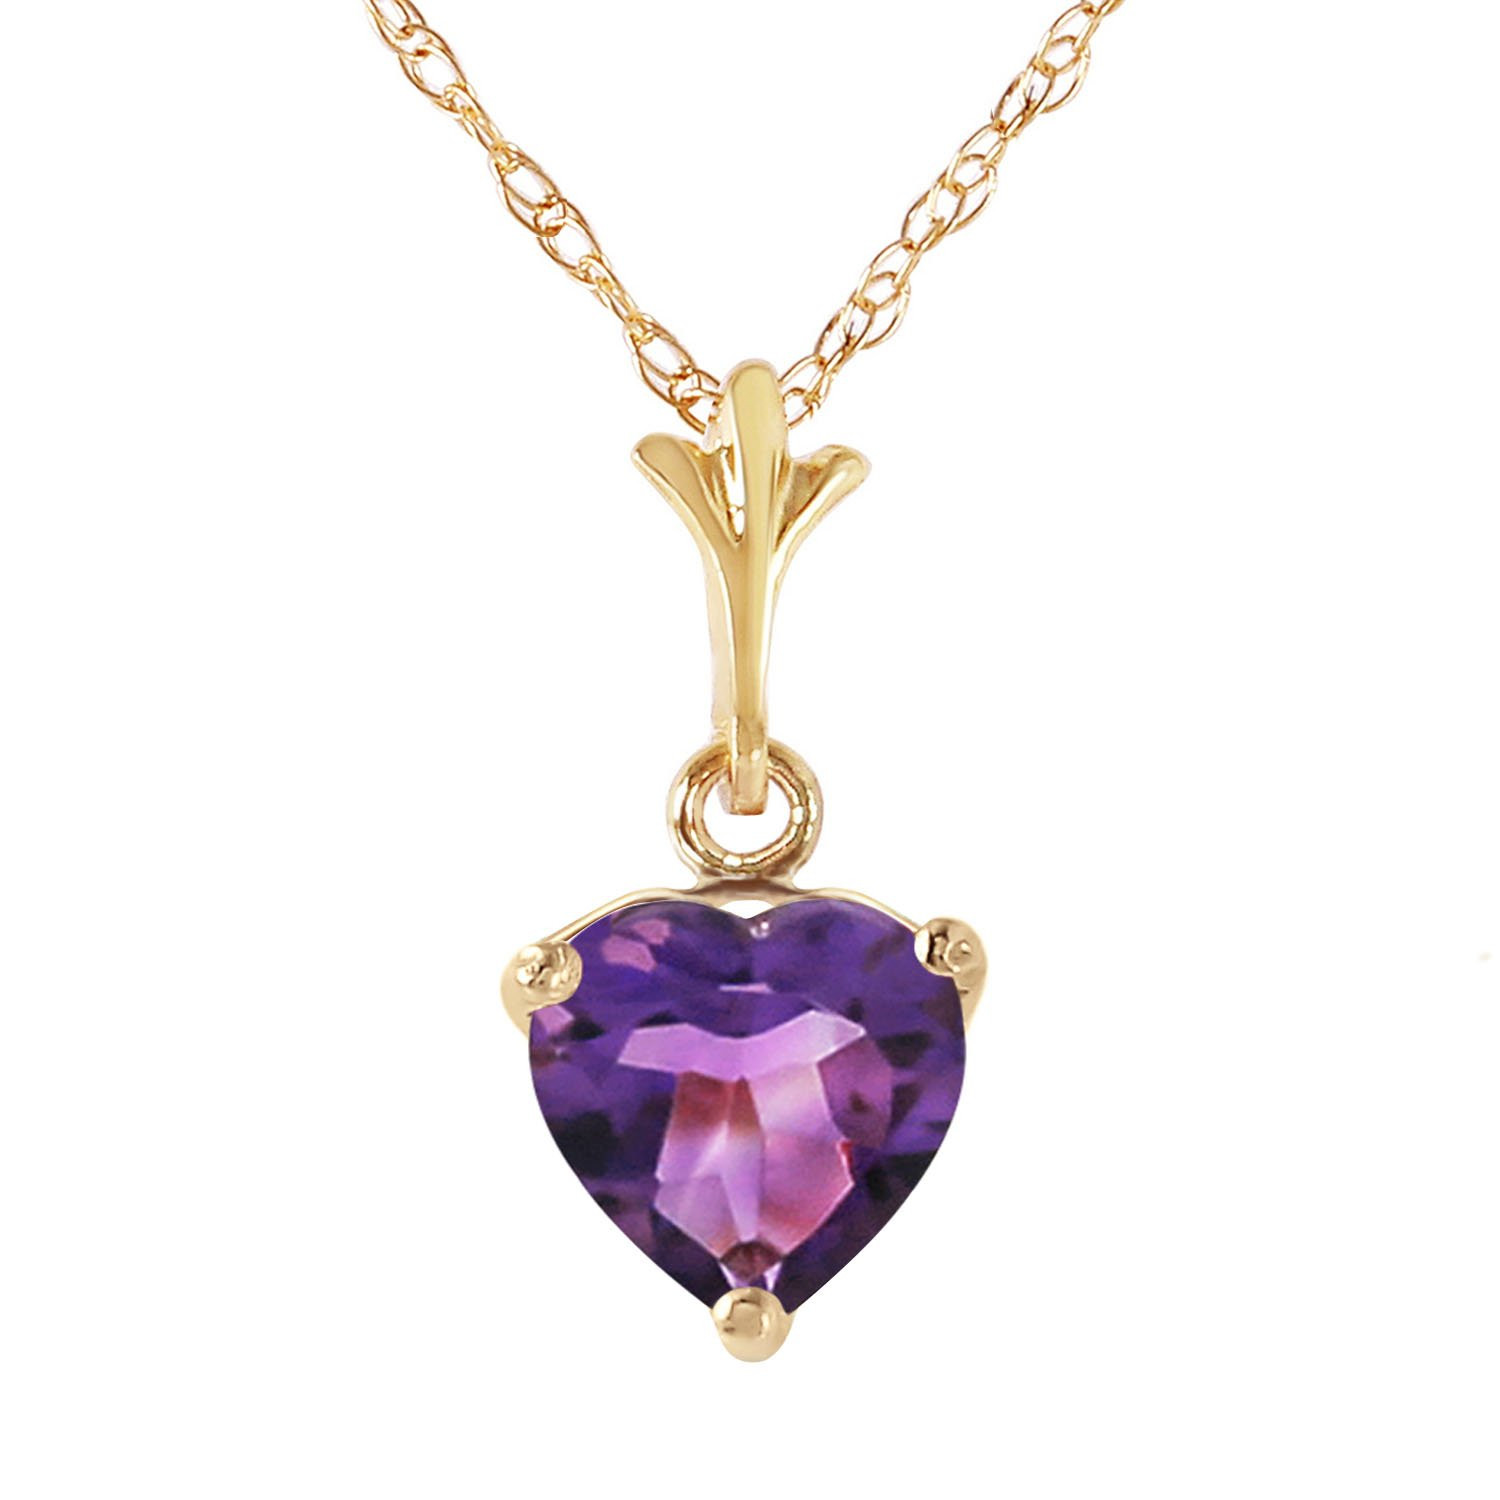 Amethyst Heart Necklace
 Give Her A Romantic Heart Shaped Amethyst Necklace